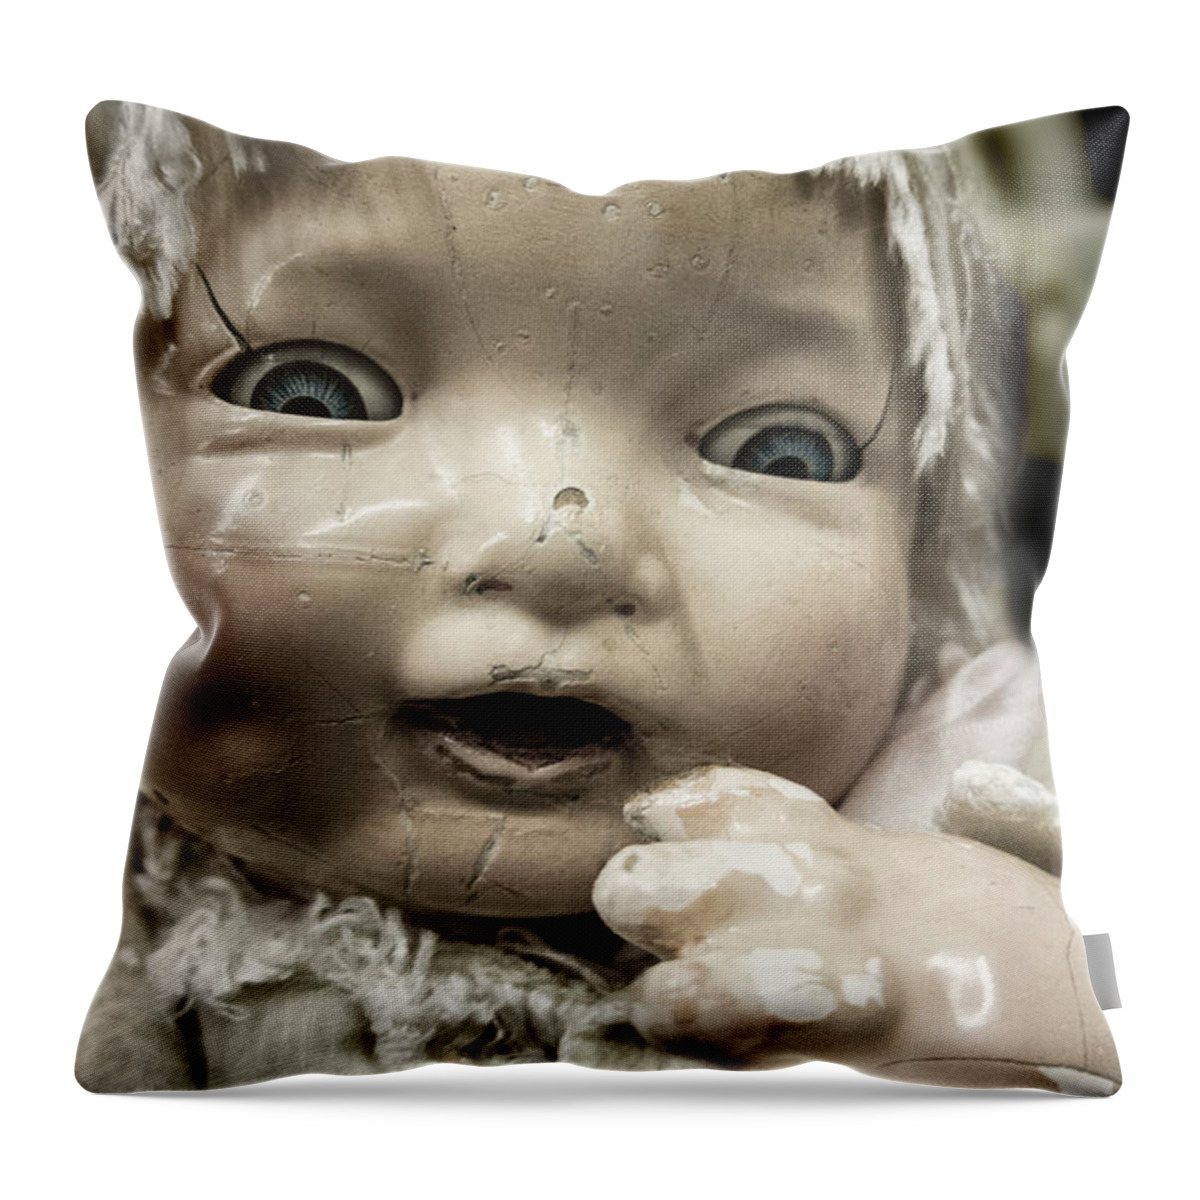 Antique Throw Pillow featuring the photograph Whispering by Margie Hurwich